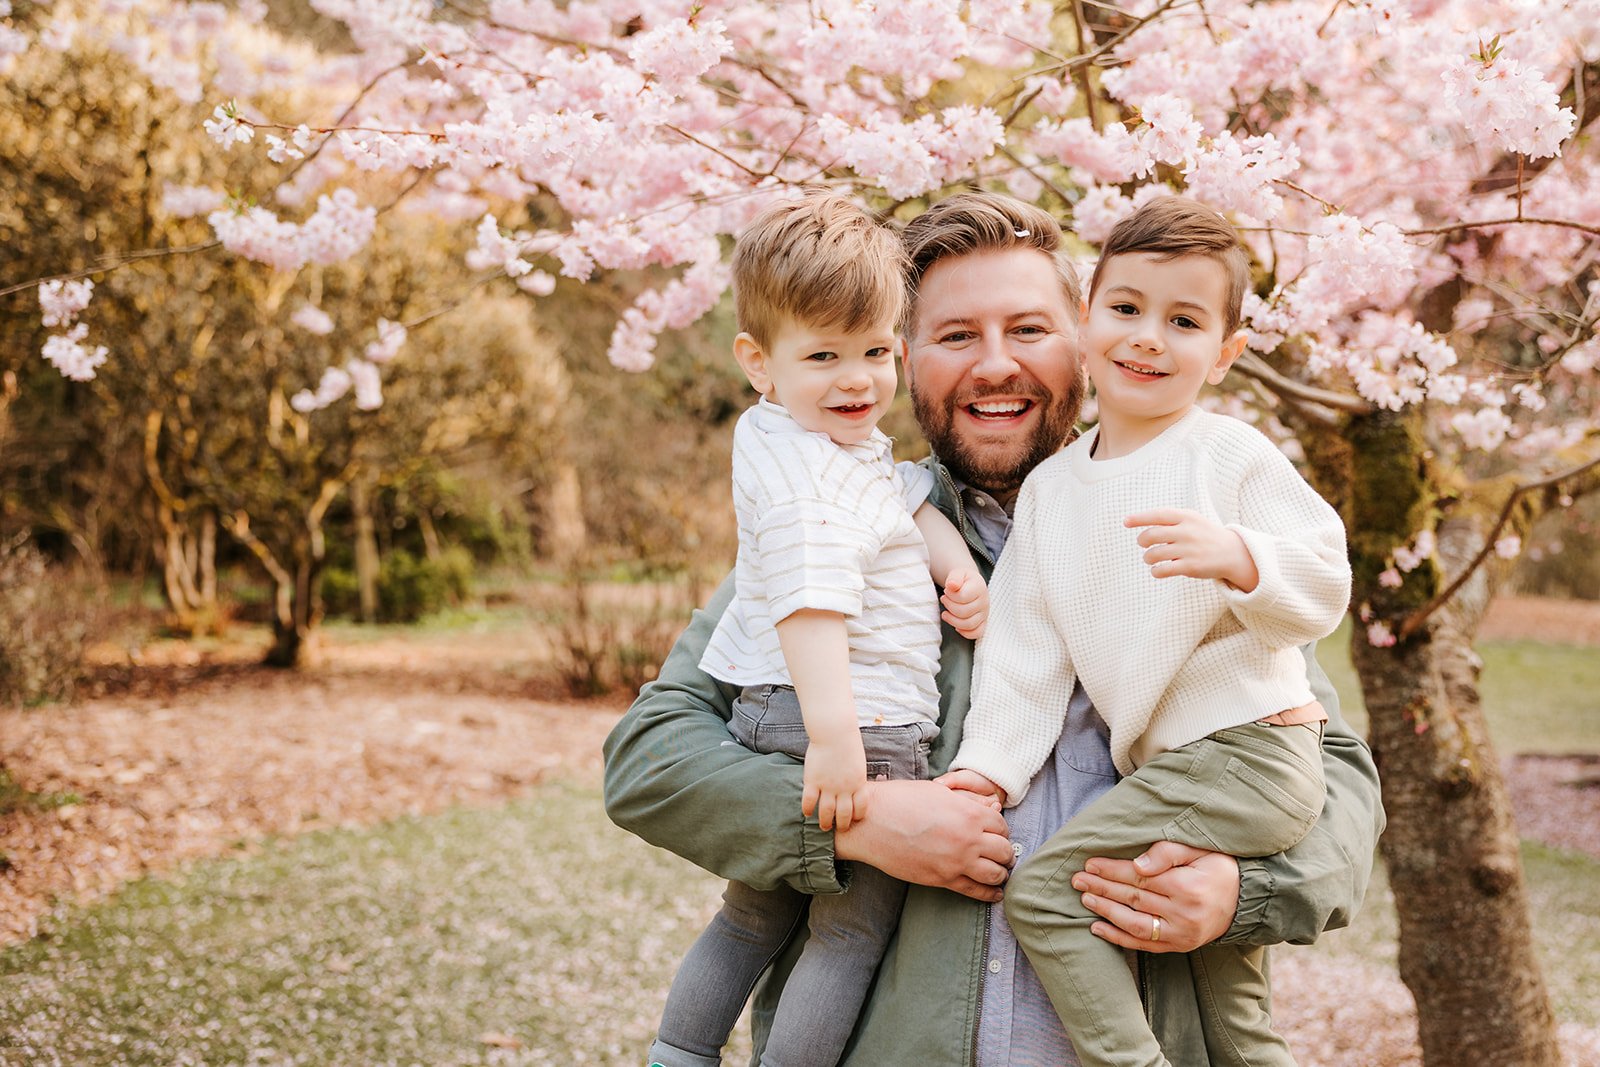 A close-up photo of a smiling father carrying his two young sons in front of a cherry blossom tree. 